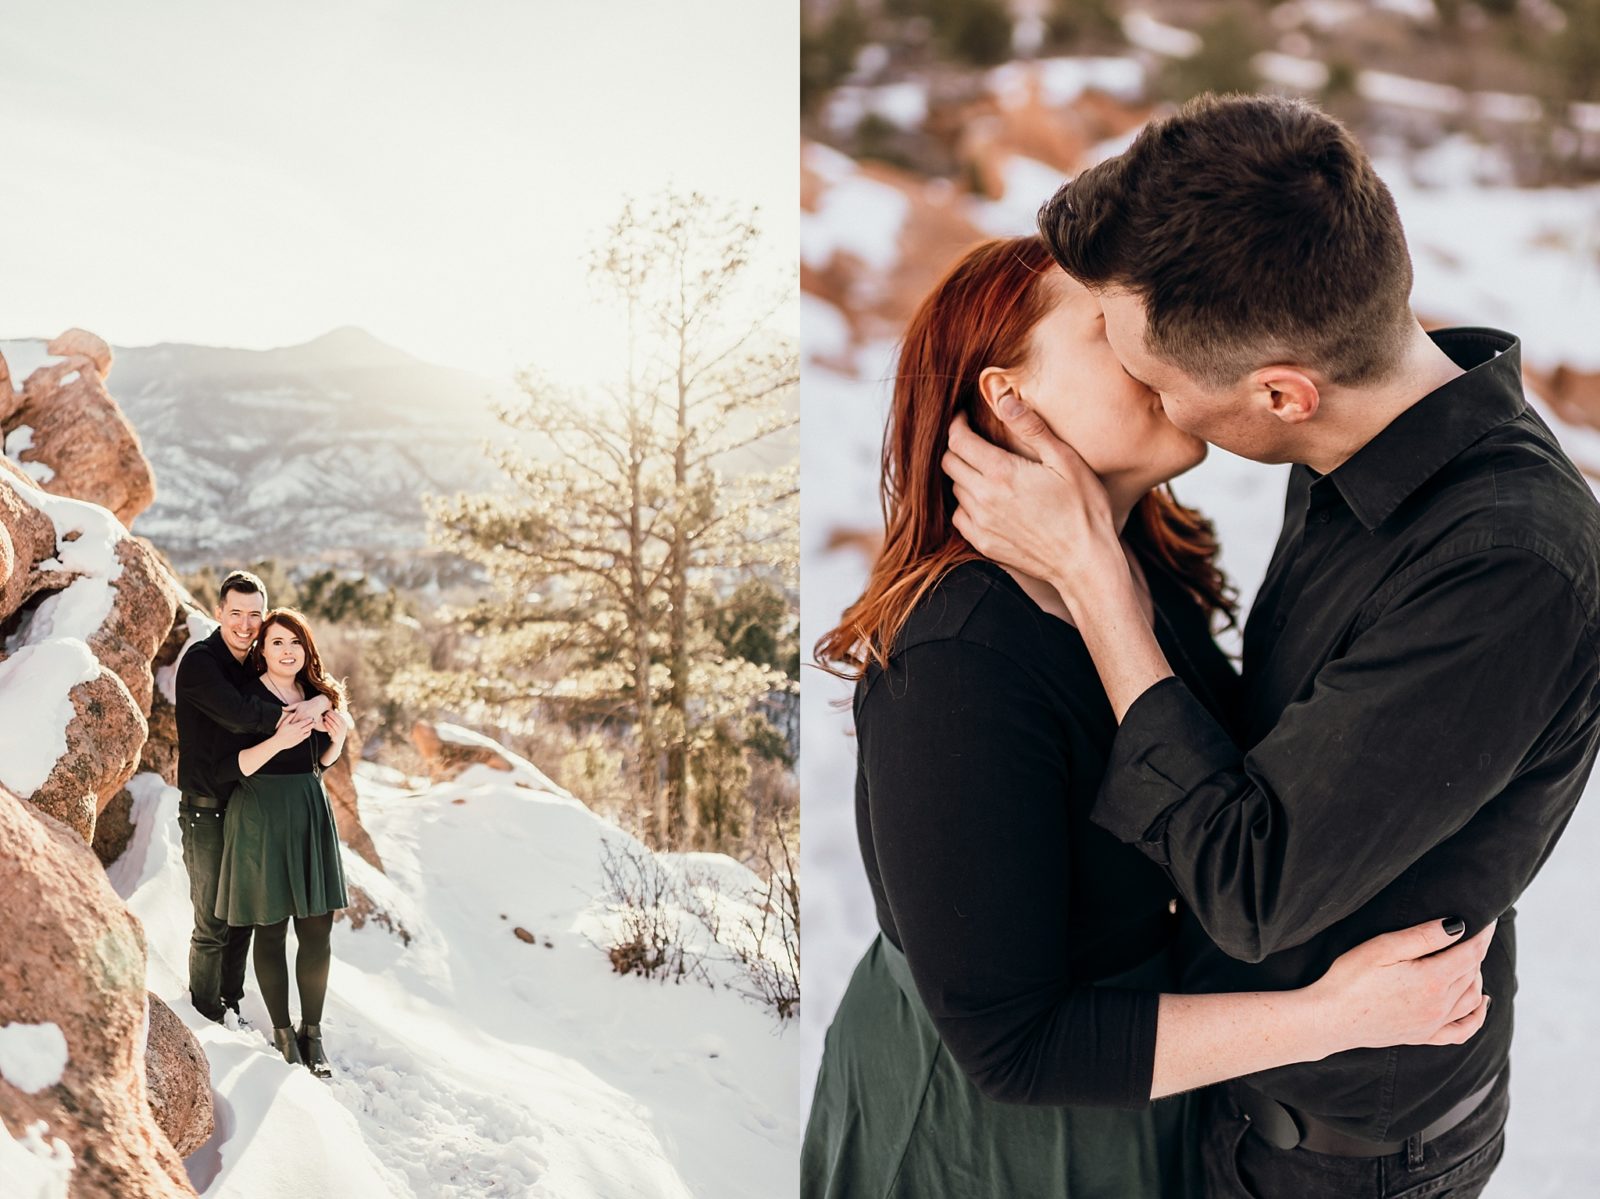 engagement photos at high point at garden of the gods in colorado springs